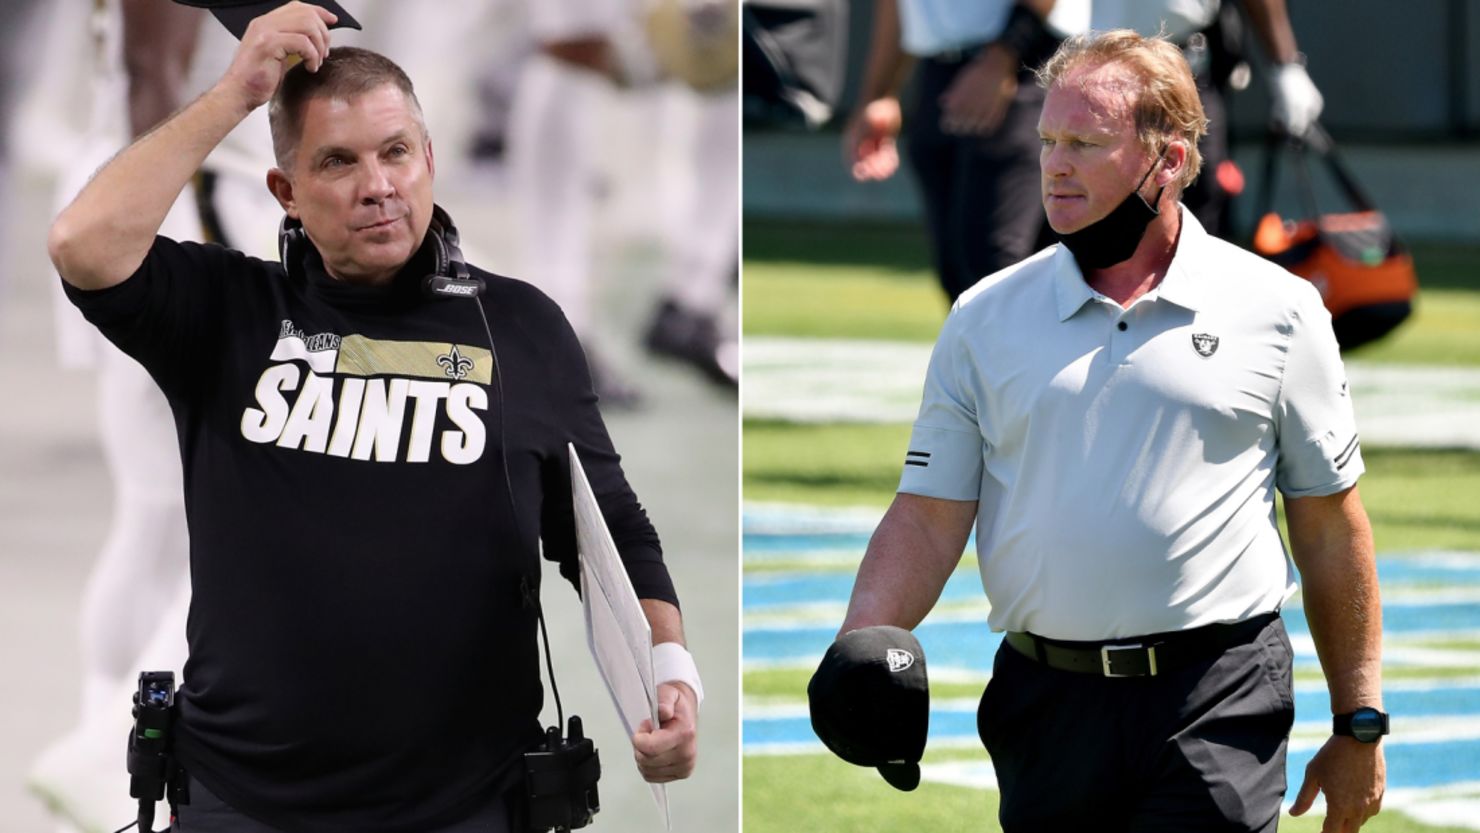 Sean Payton of the Saints and Jon Gruden of the Raiders were each fined $100,000, a league source told CNN.